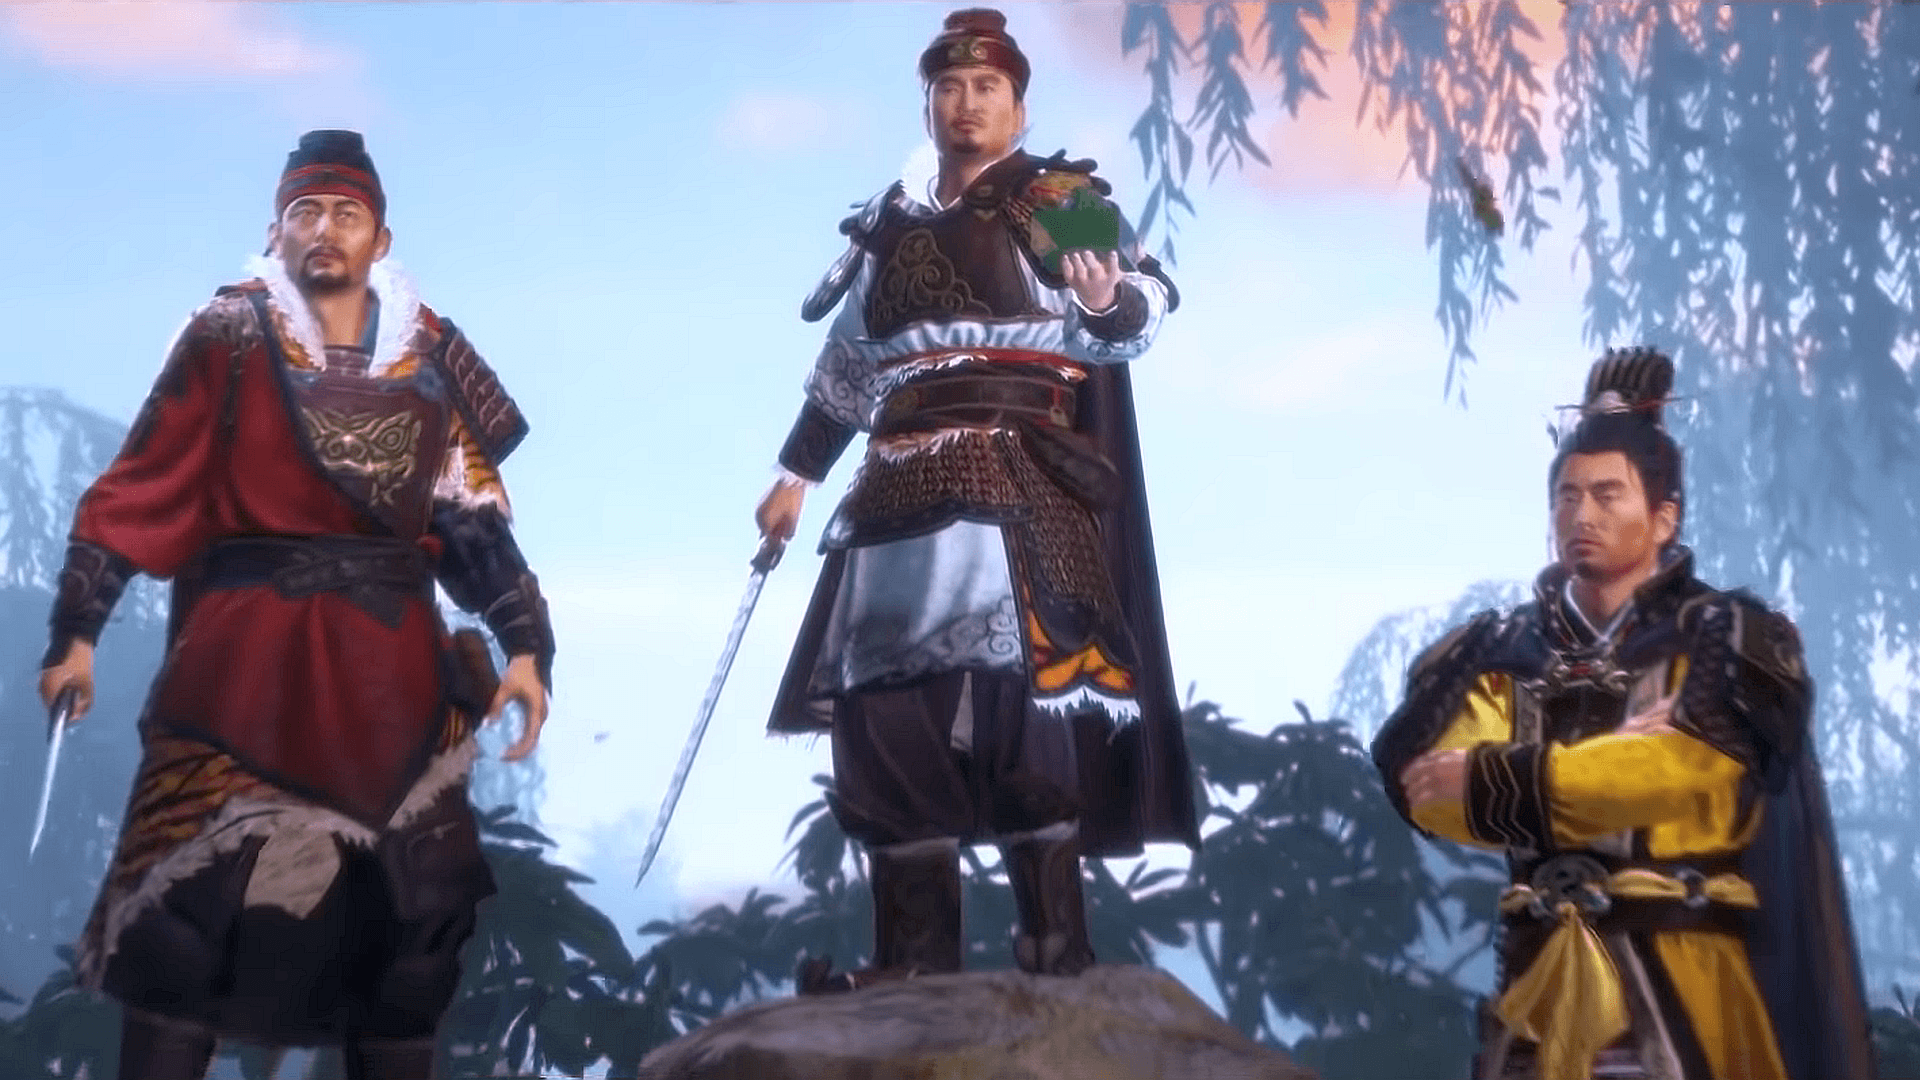 In Total War: Three Kingdoms, your faction's abilities will change